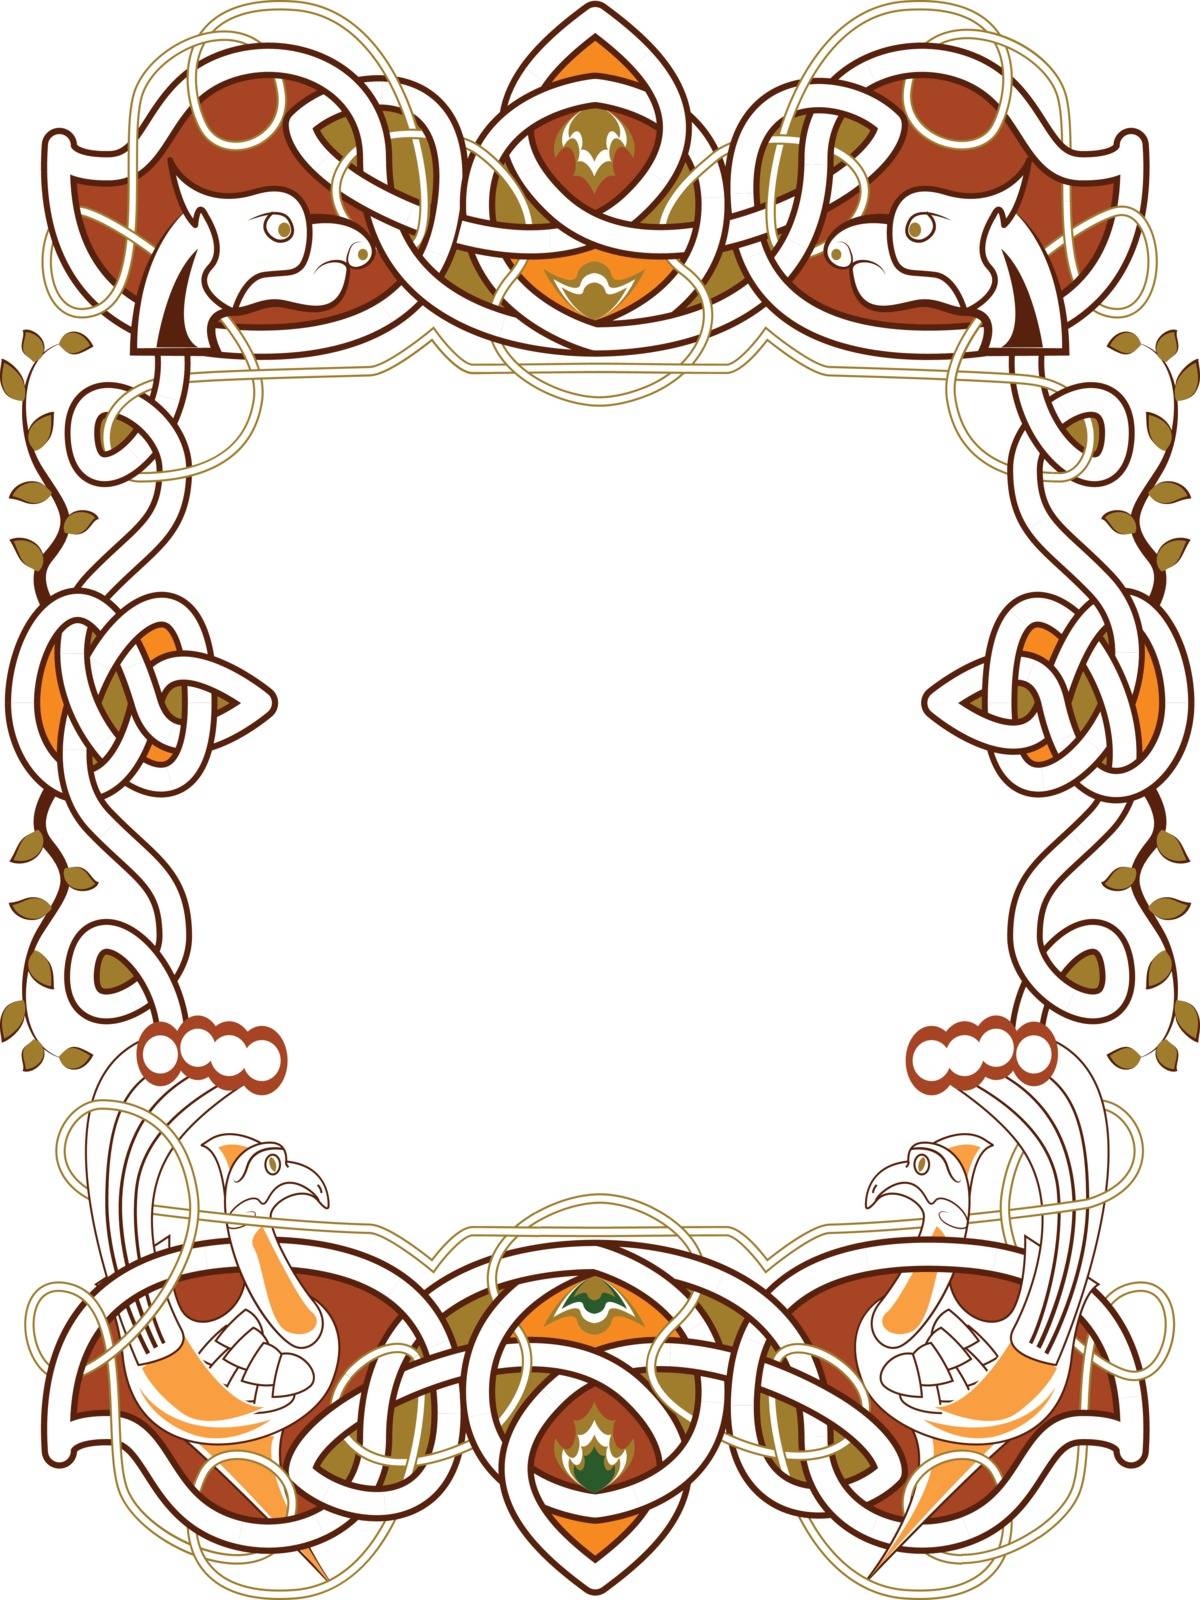 celtic frame in the Irish style - vector